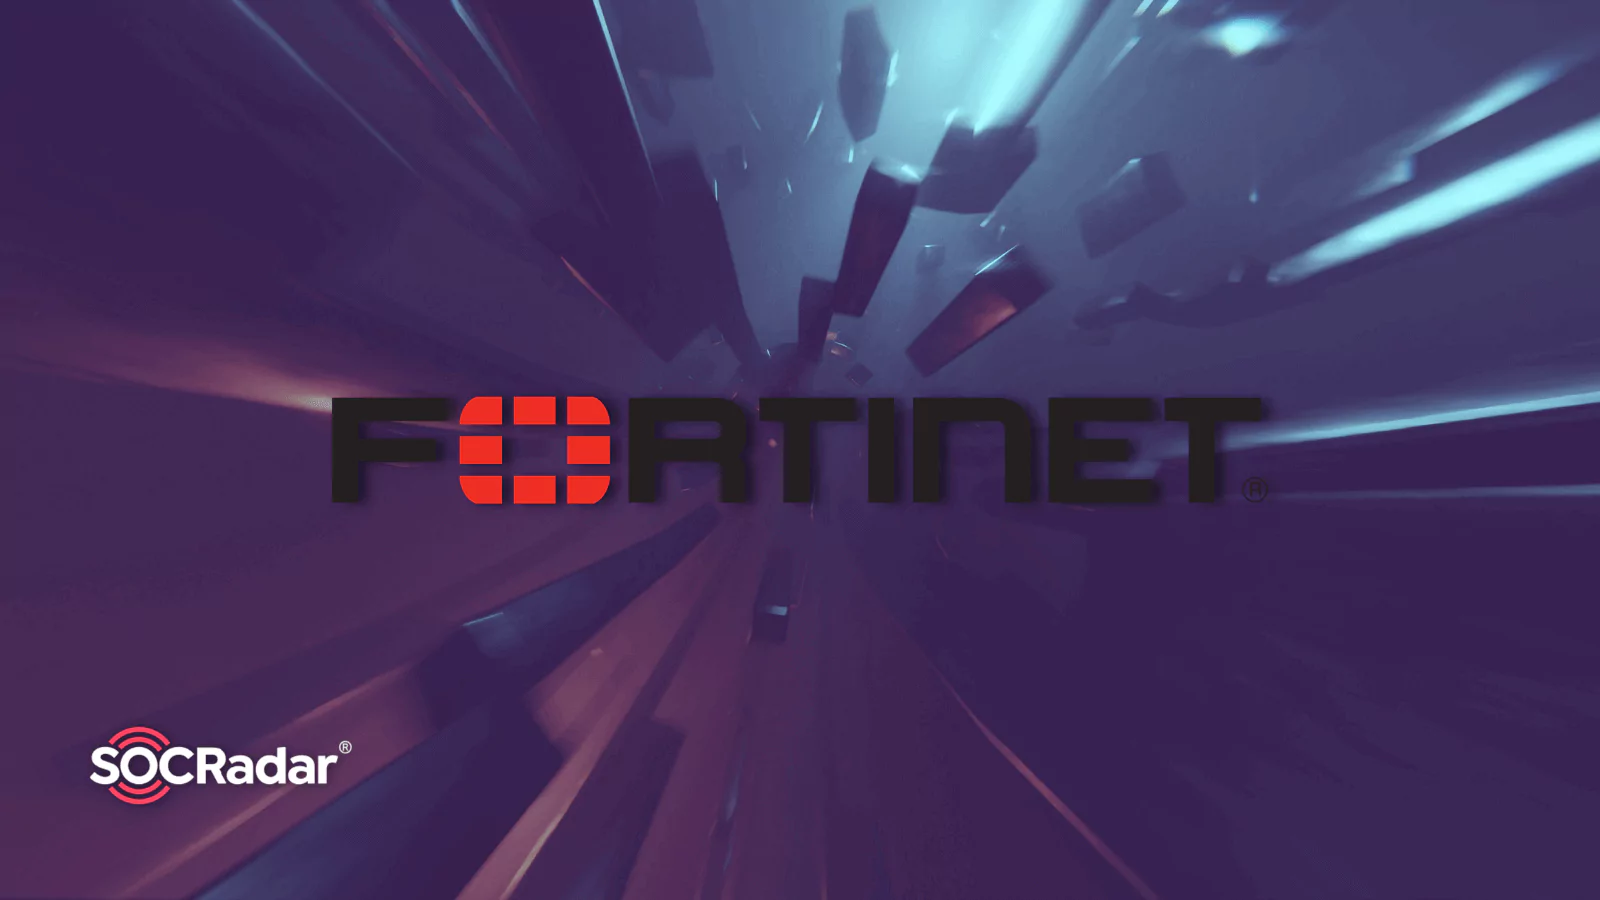 SOCRadar® Cyber Intelligence Inc. | What Do You Need to Know About Fortinet Critical Authentication Bypass Vulnerability (CVE-2022-40684)?